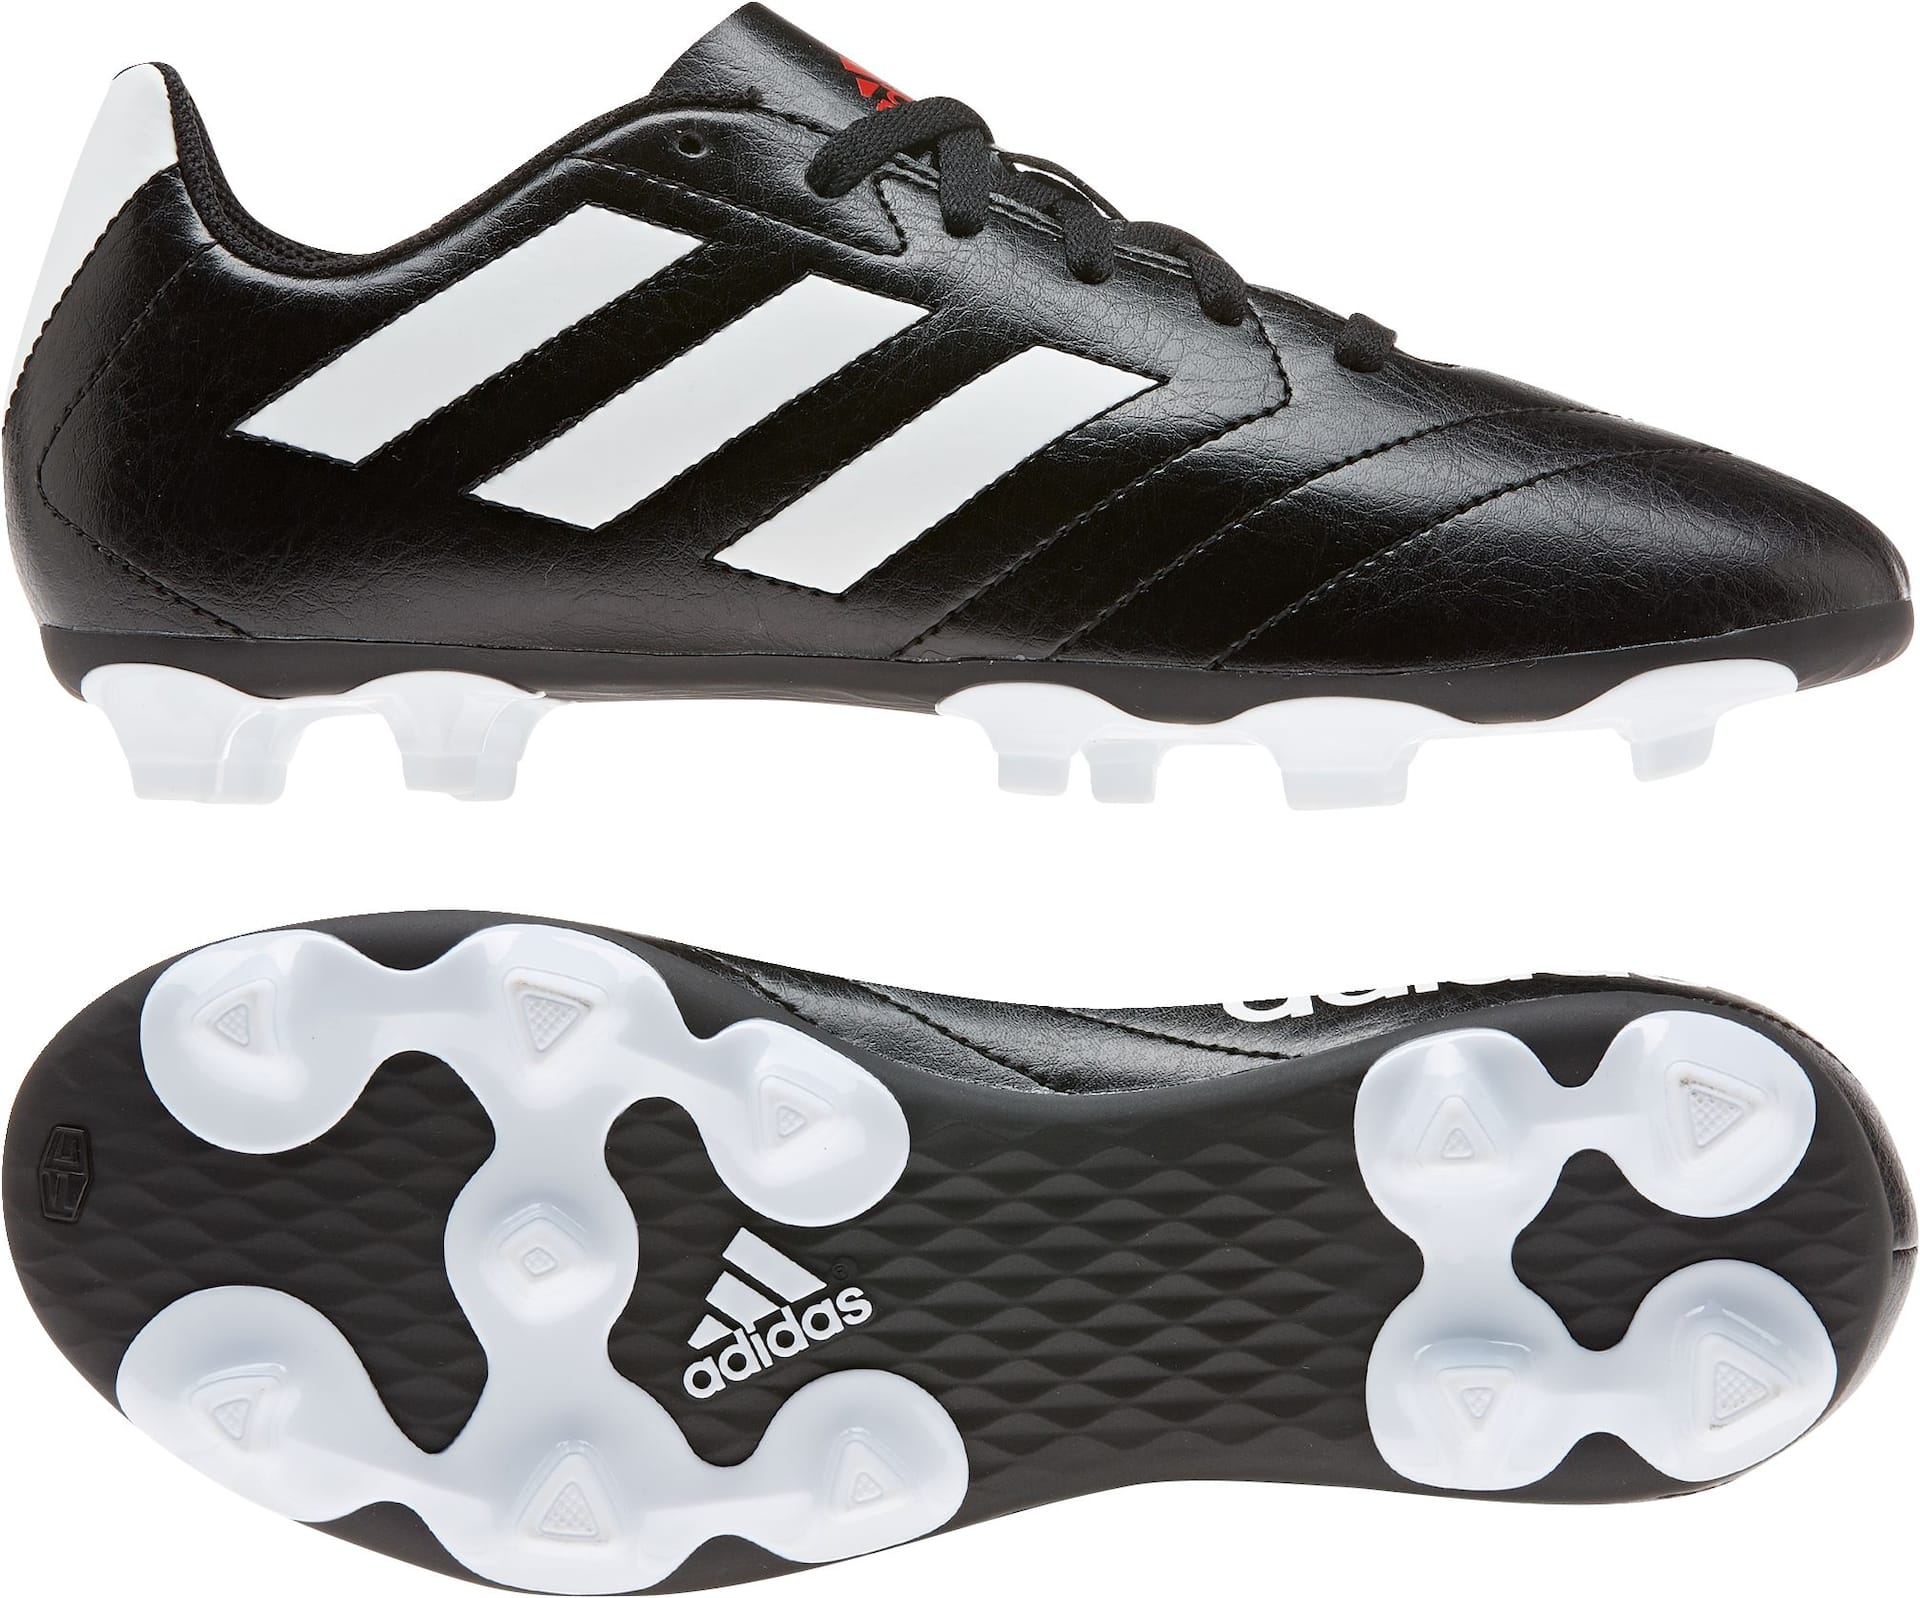 Adidas X Soccer Cleats & Shoes | Firm Ground, Turf, Indoor | Free Shipping  | SOCCER.COM